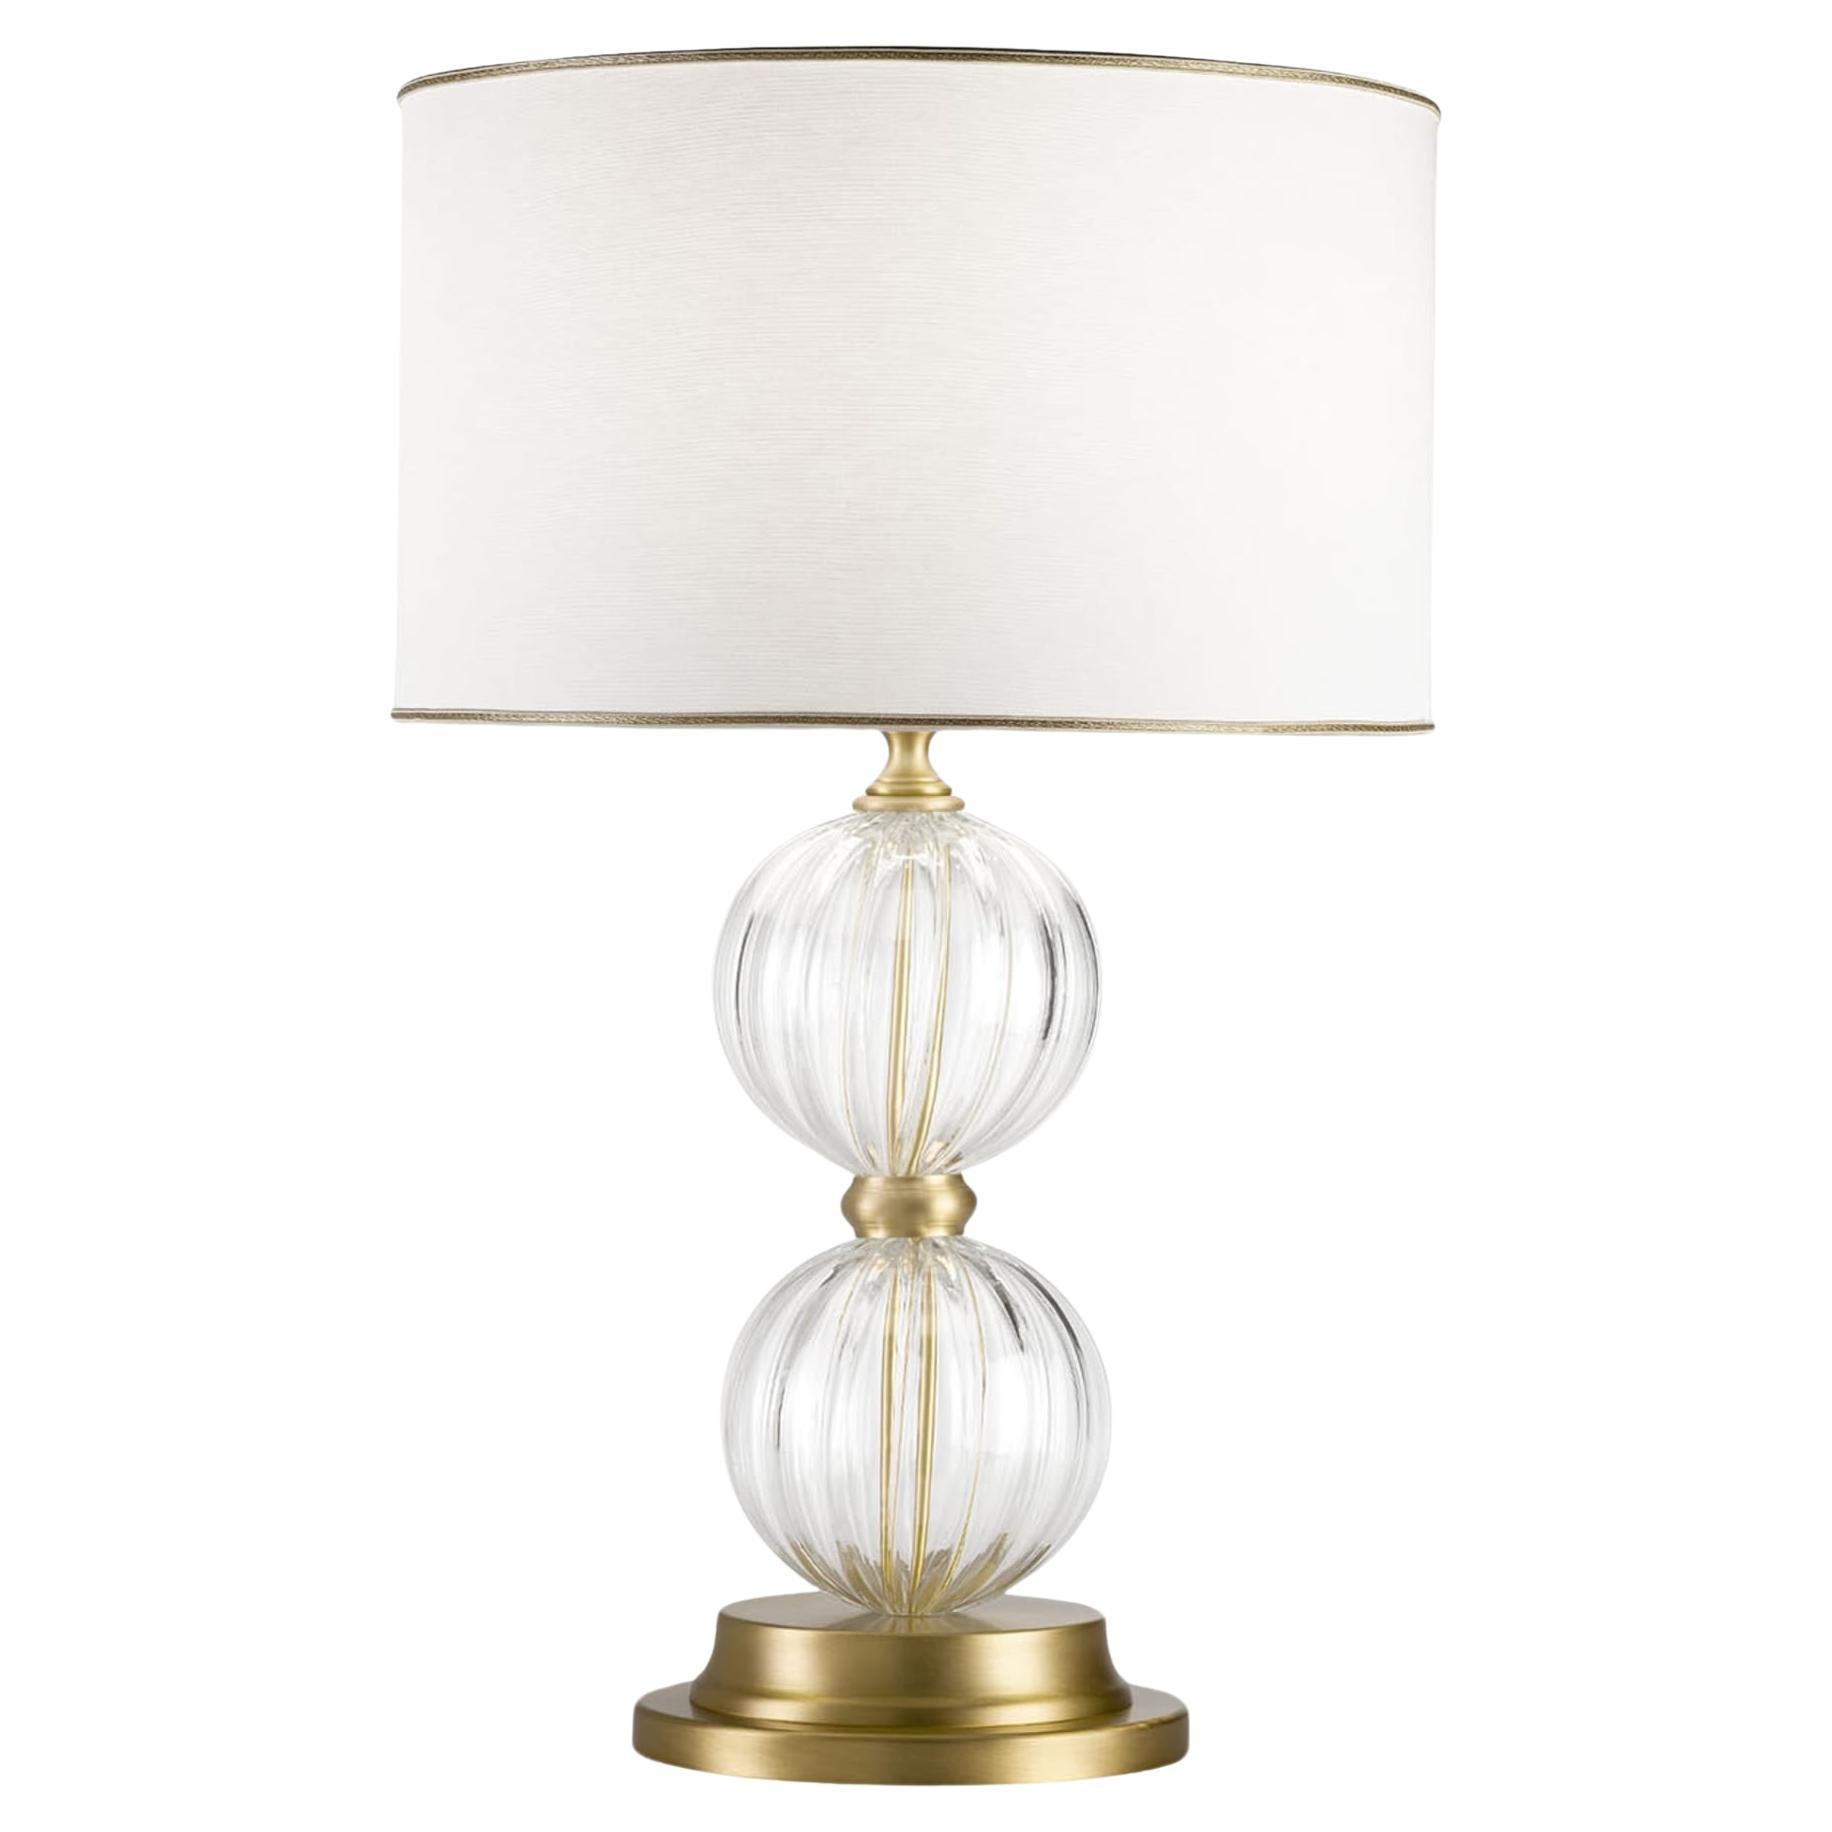 Double Glass Balls Table Lamp For Sale